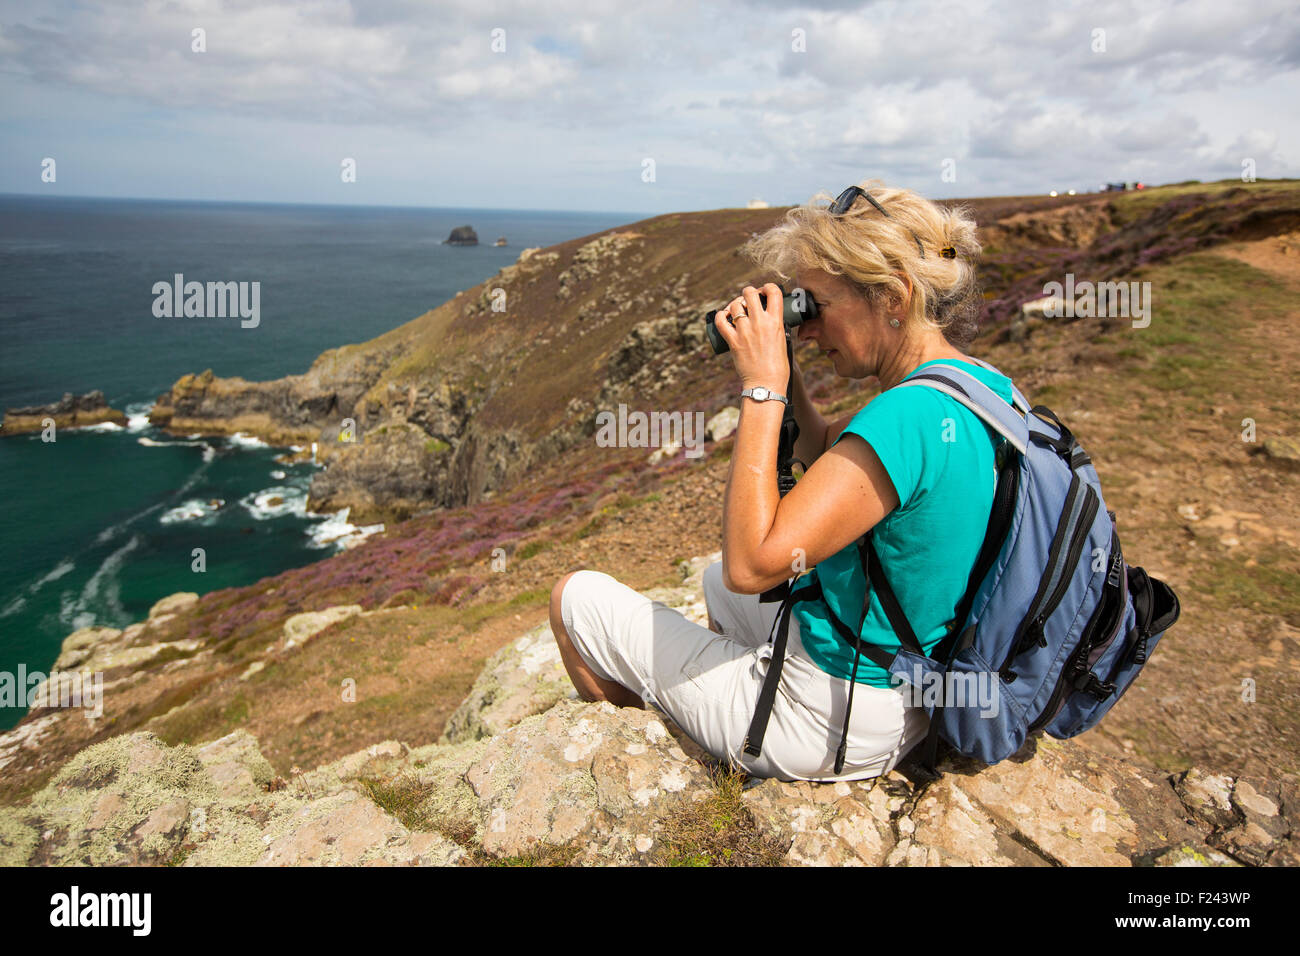 A woman sea watching on the cliffs at St Agnes, Cornwall, UK. Stock Photo